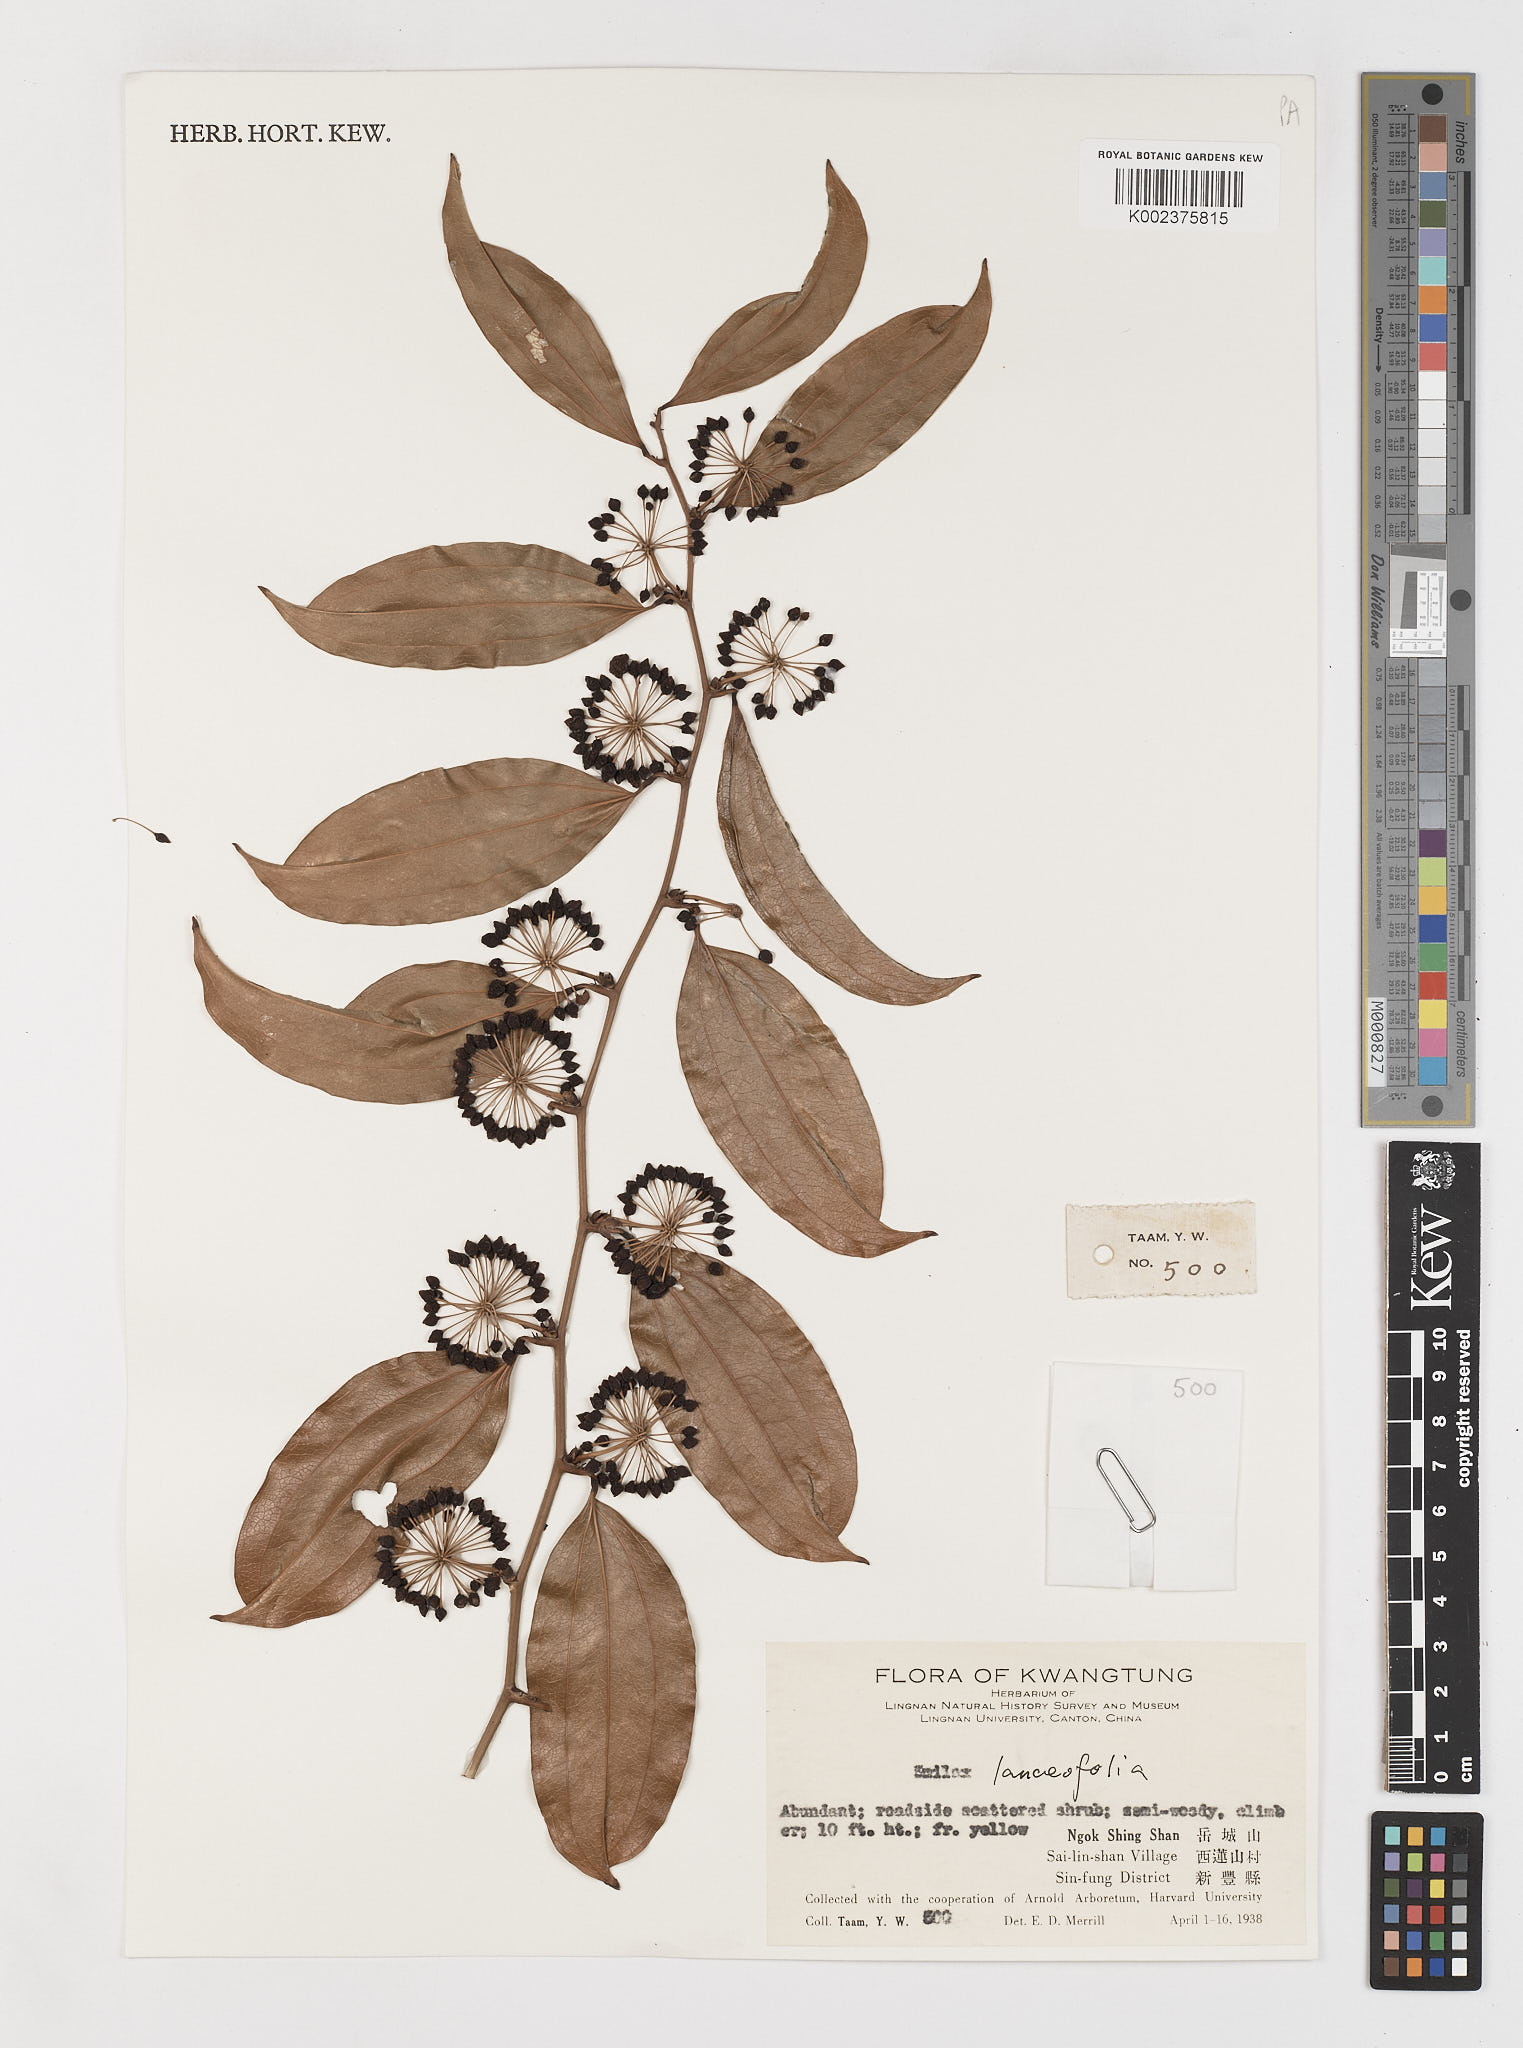 Herbarium specimen showing a dried plant made of leaves and seeds